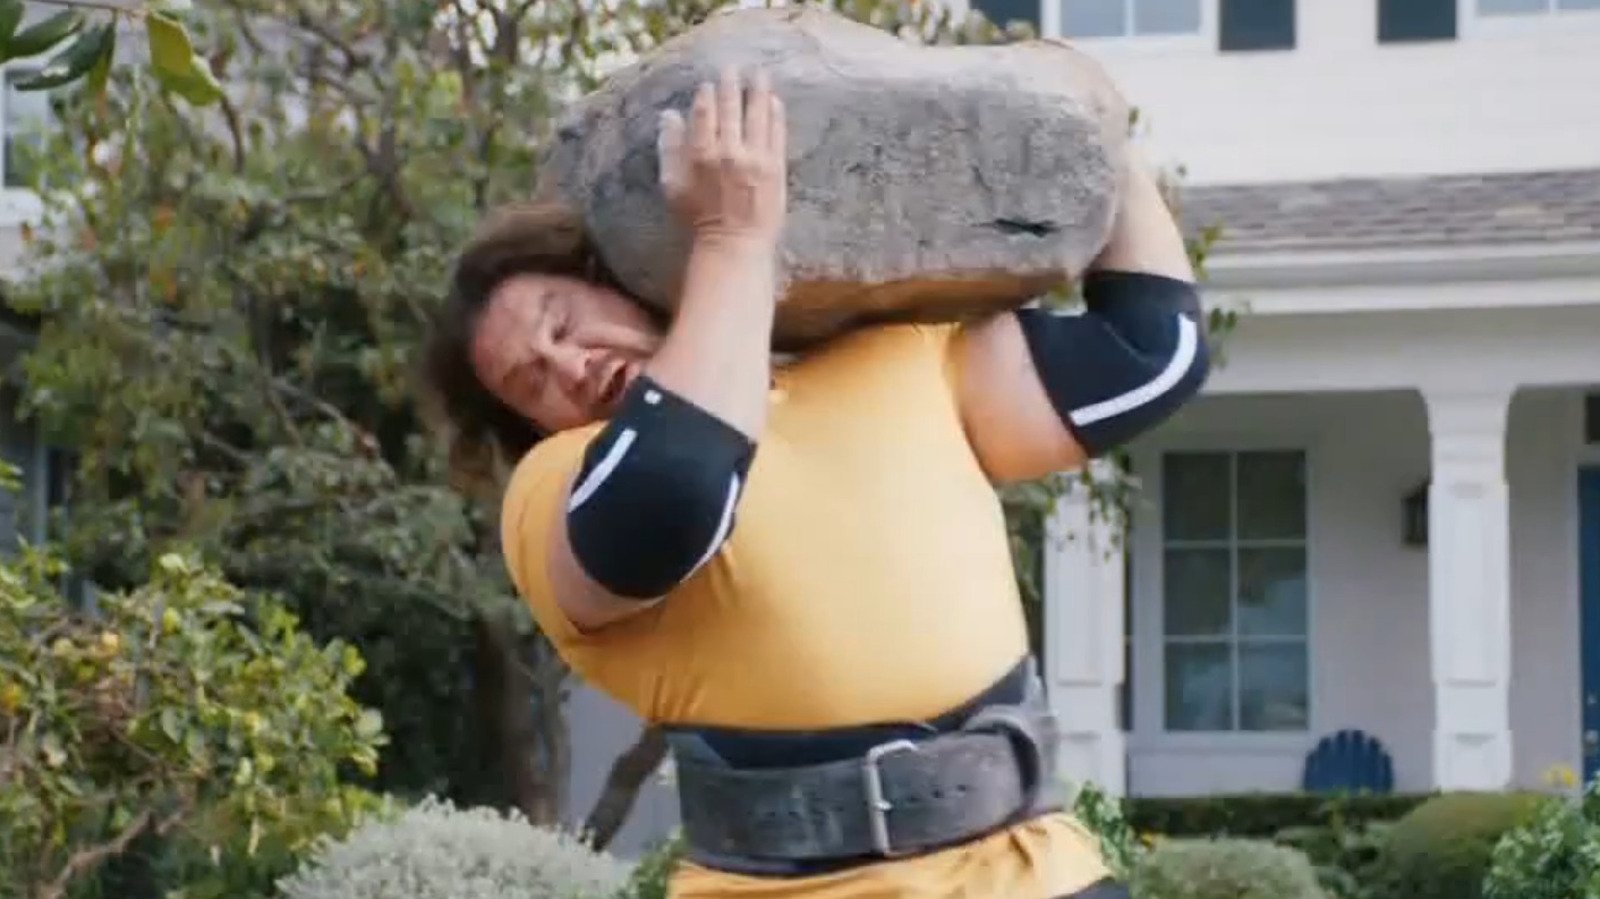 The Truth About The Strongman In Geico's World's Strongest Man Commercial